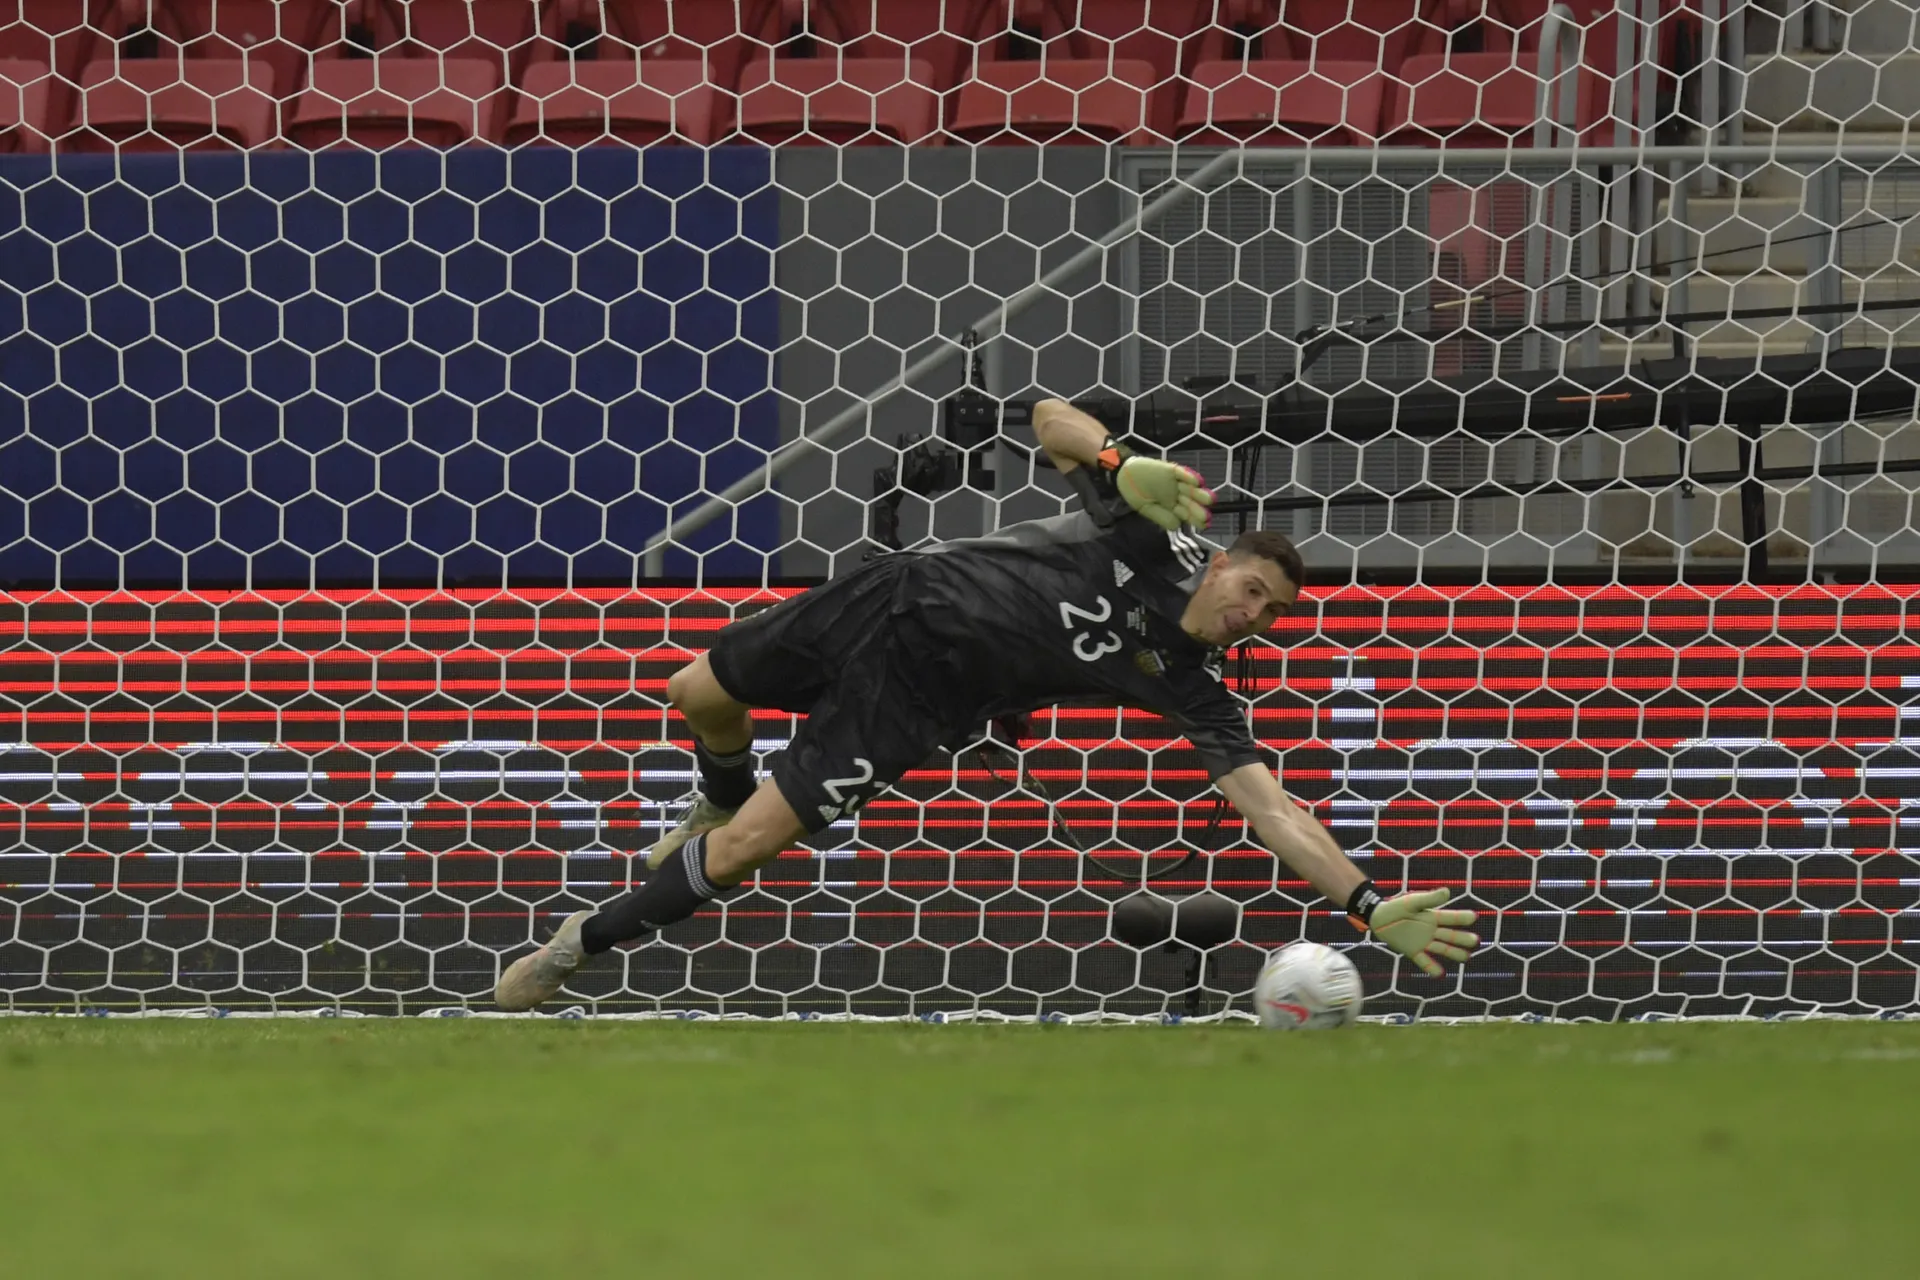 Argentinian goalie Emiliano Martinez dives to save penalty kick during the semi-final match of Copa America Brazil 2021 last July. (Photo by Pedro Vilela/Getty Images)